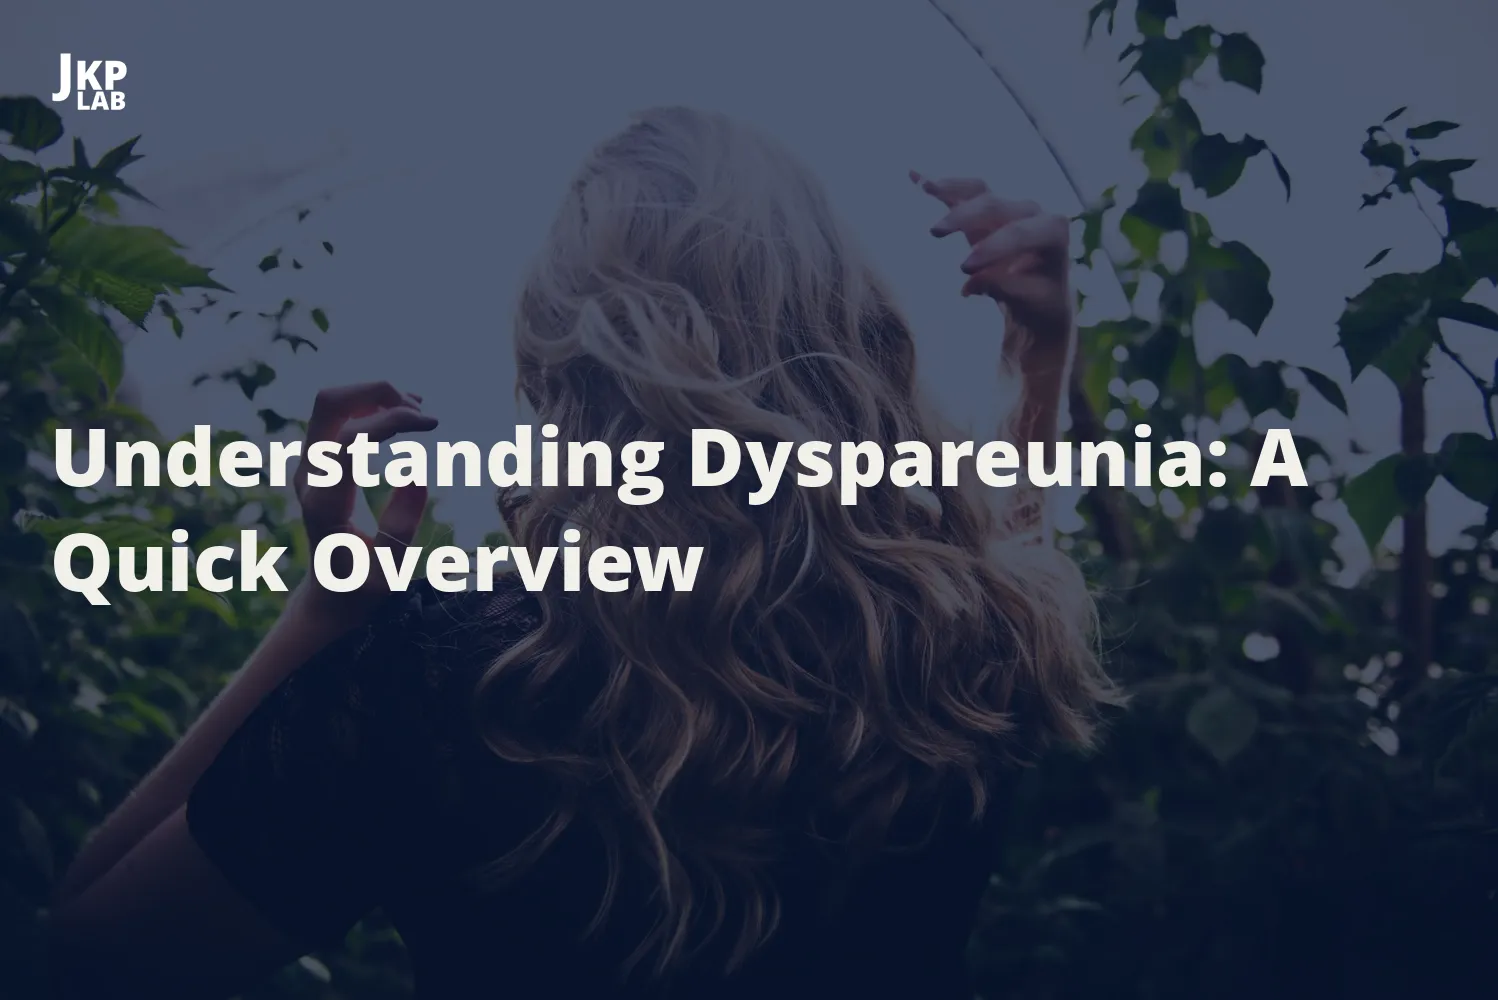 The Role of Stress in Dyspareunia